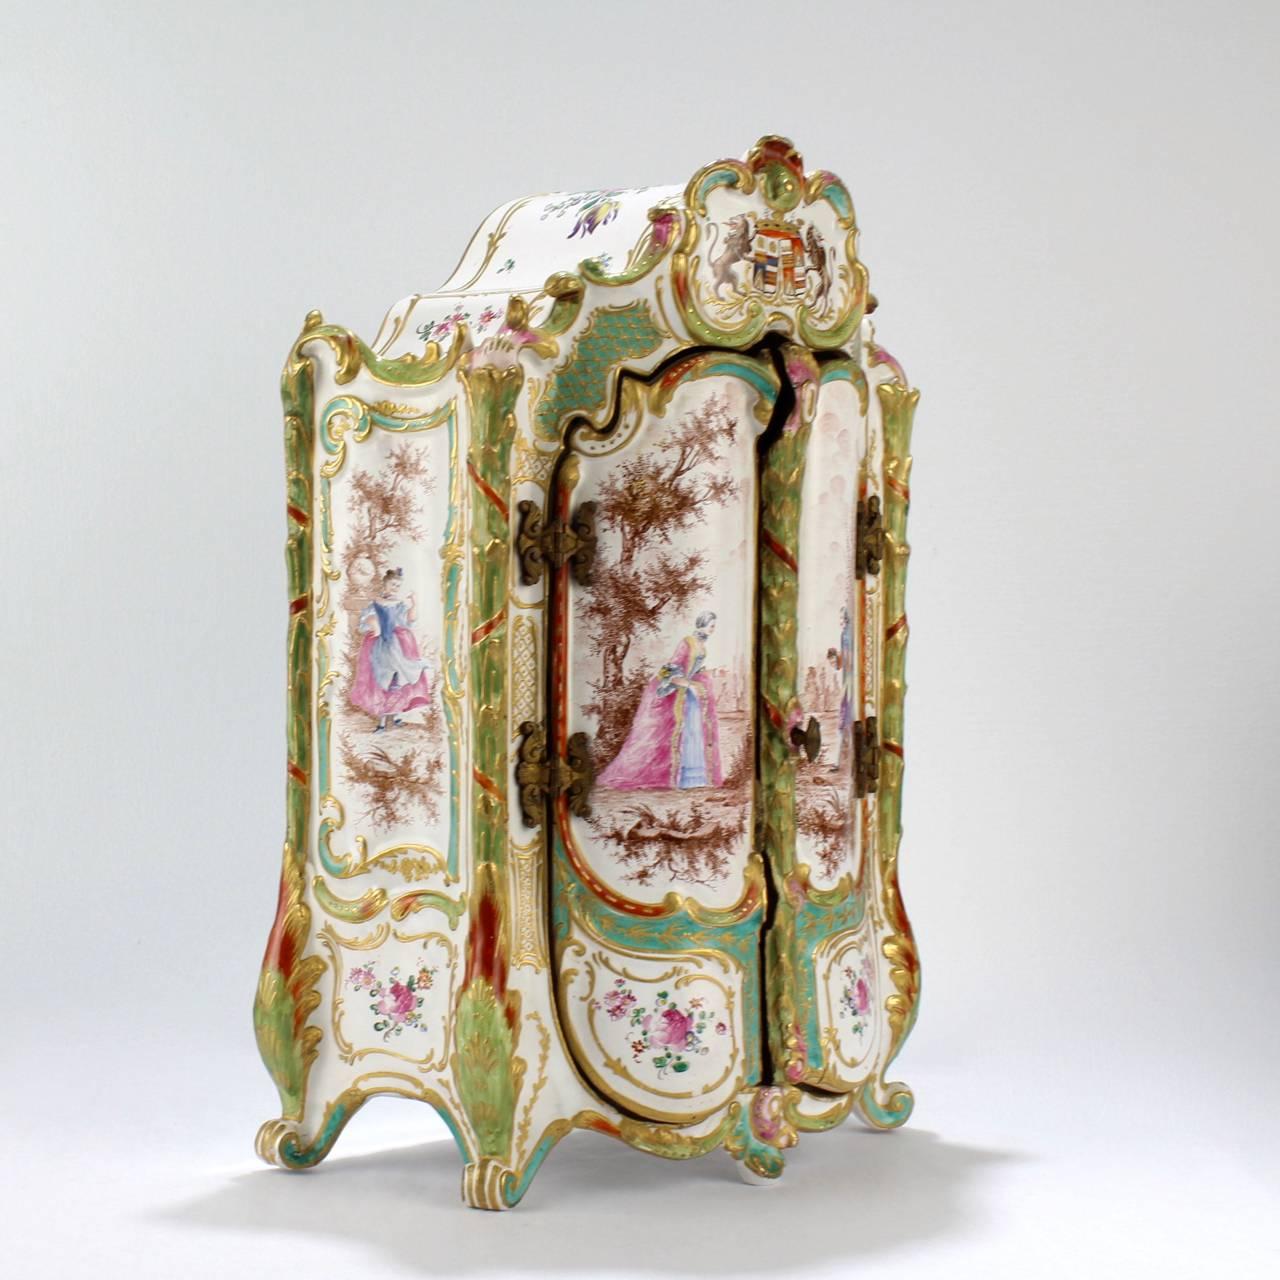 A wonderful antique miniature French faience armoire or jewelry casket.

The rococo form has finely hand painted scenes of lovers in formal garden settings and is richly decorated with floral bouquets, garlands, and swags, as well as with a faux